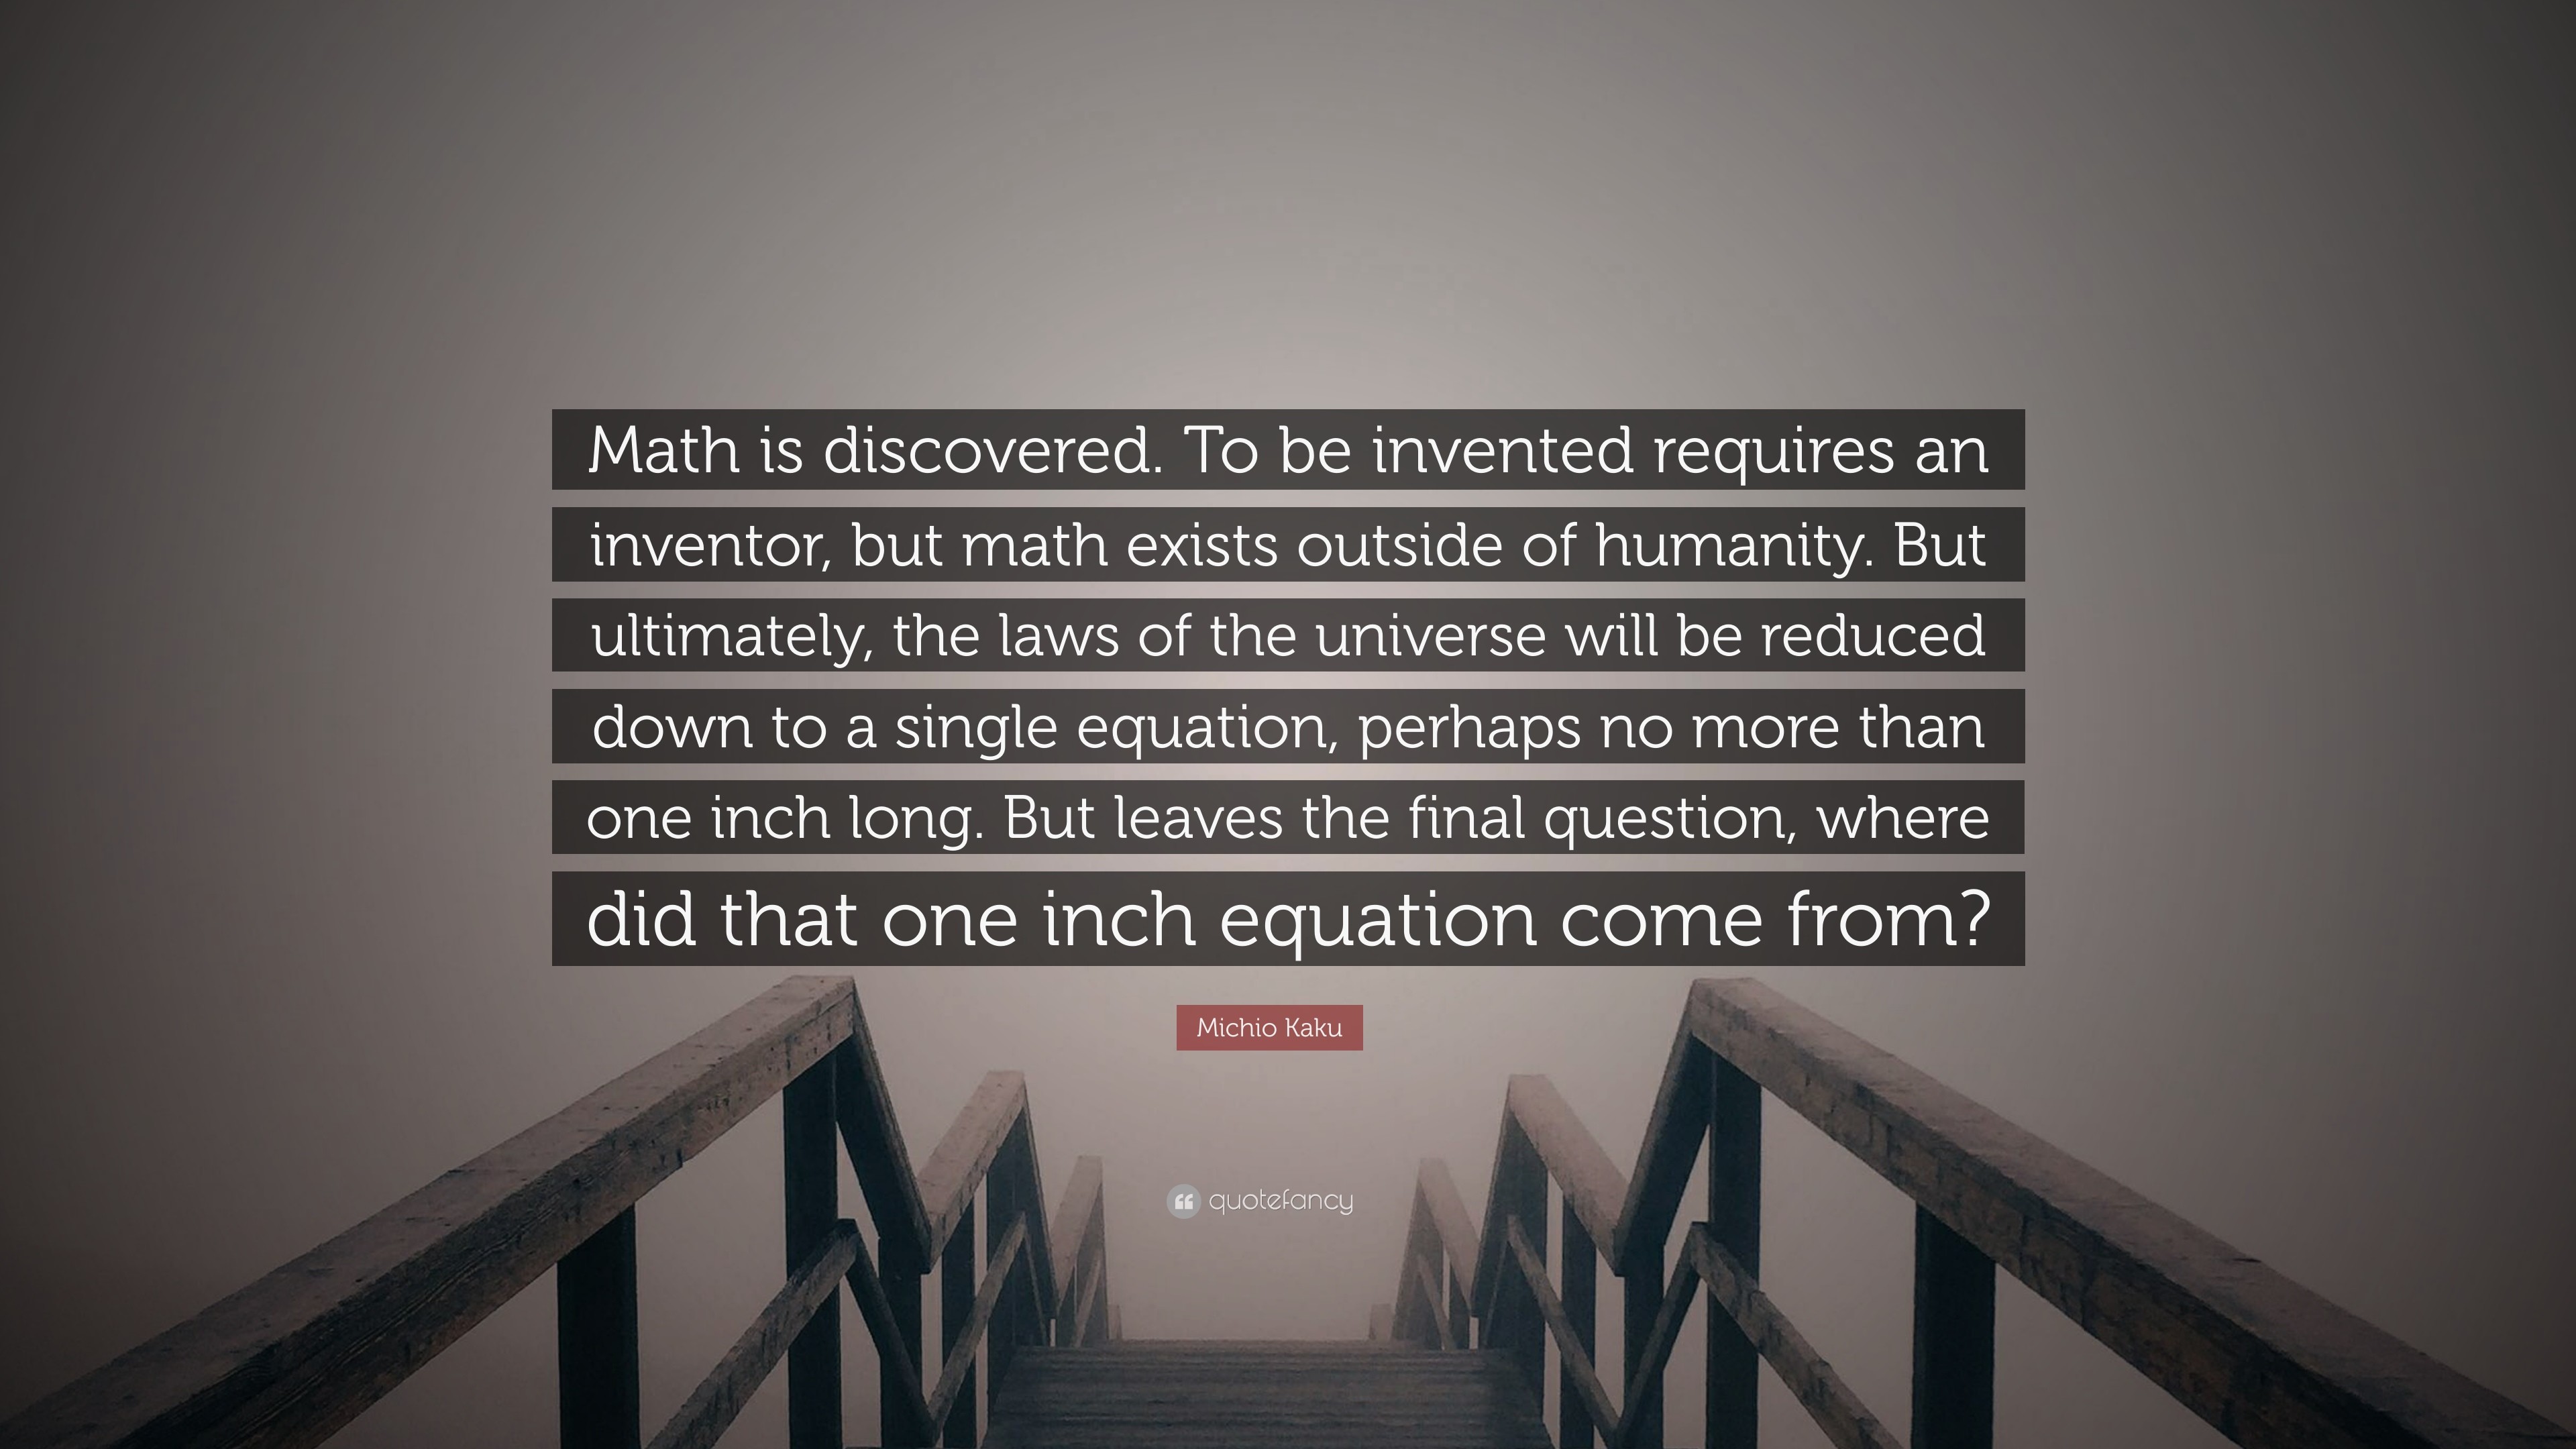 3840x2160 Michio Kaku Quote: “Math is discovered. To be invented requires an inventor,